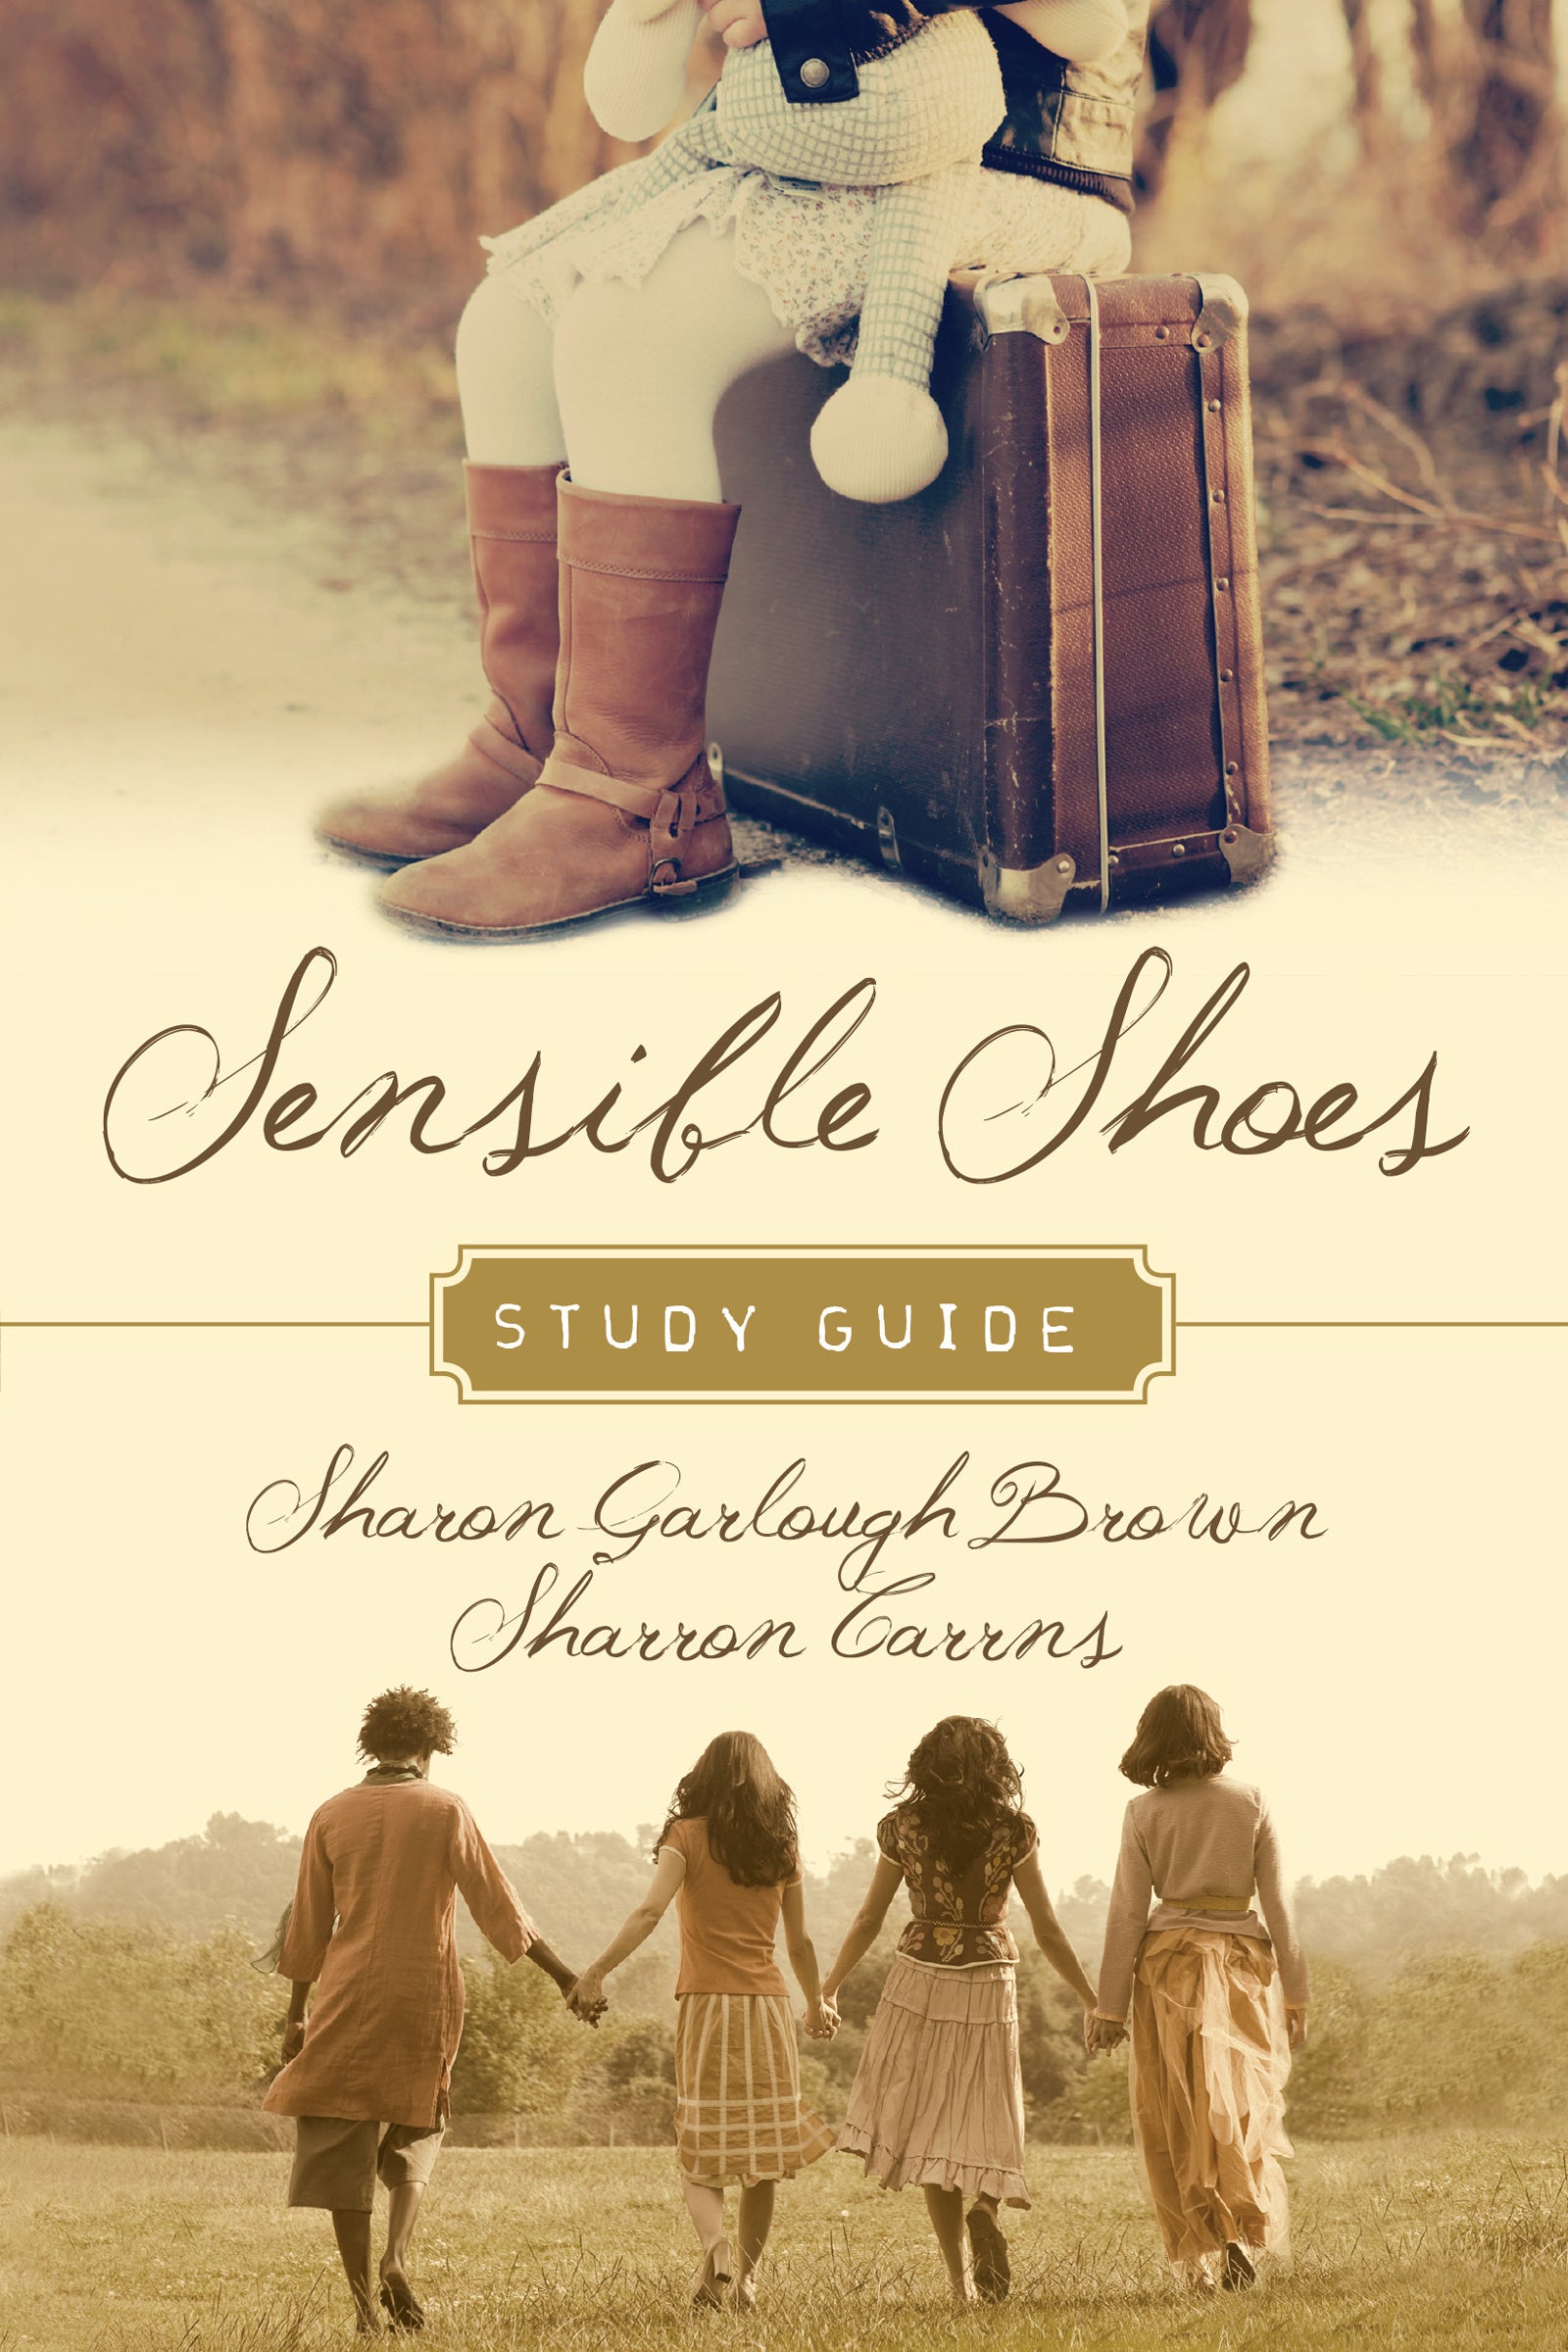 Image of Sensible Shoes Study Guide other